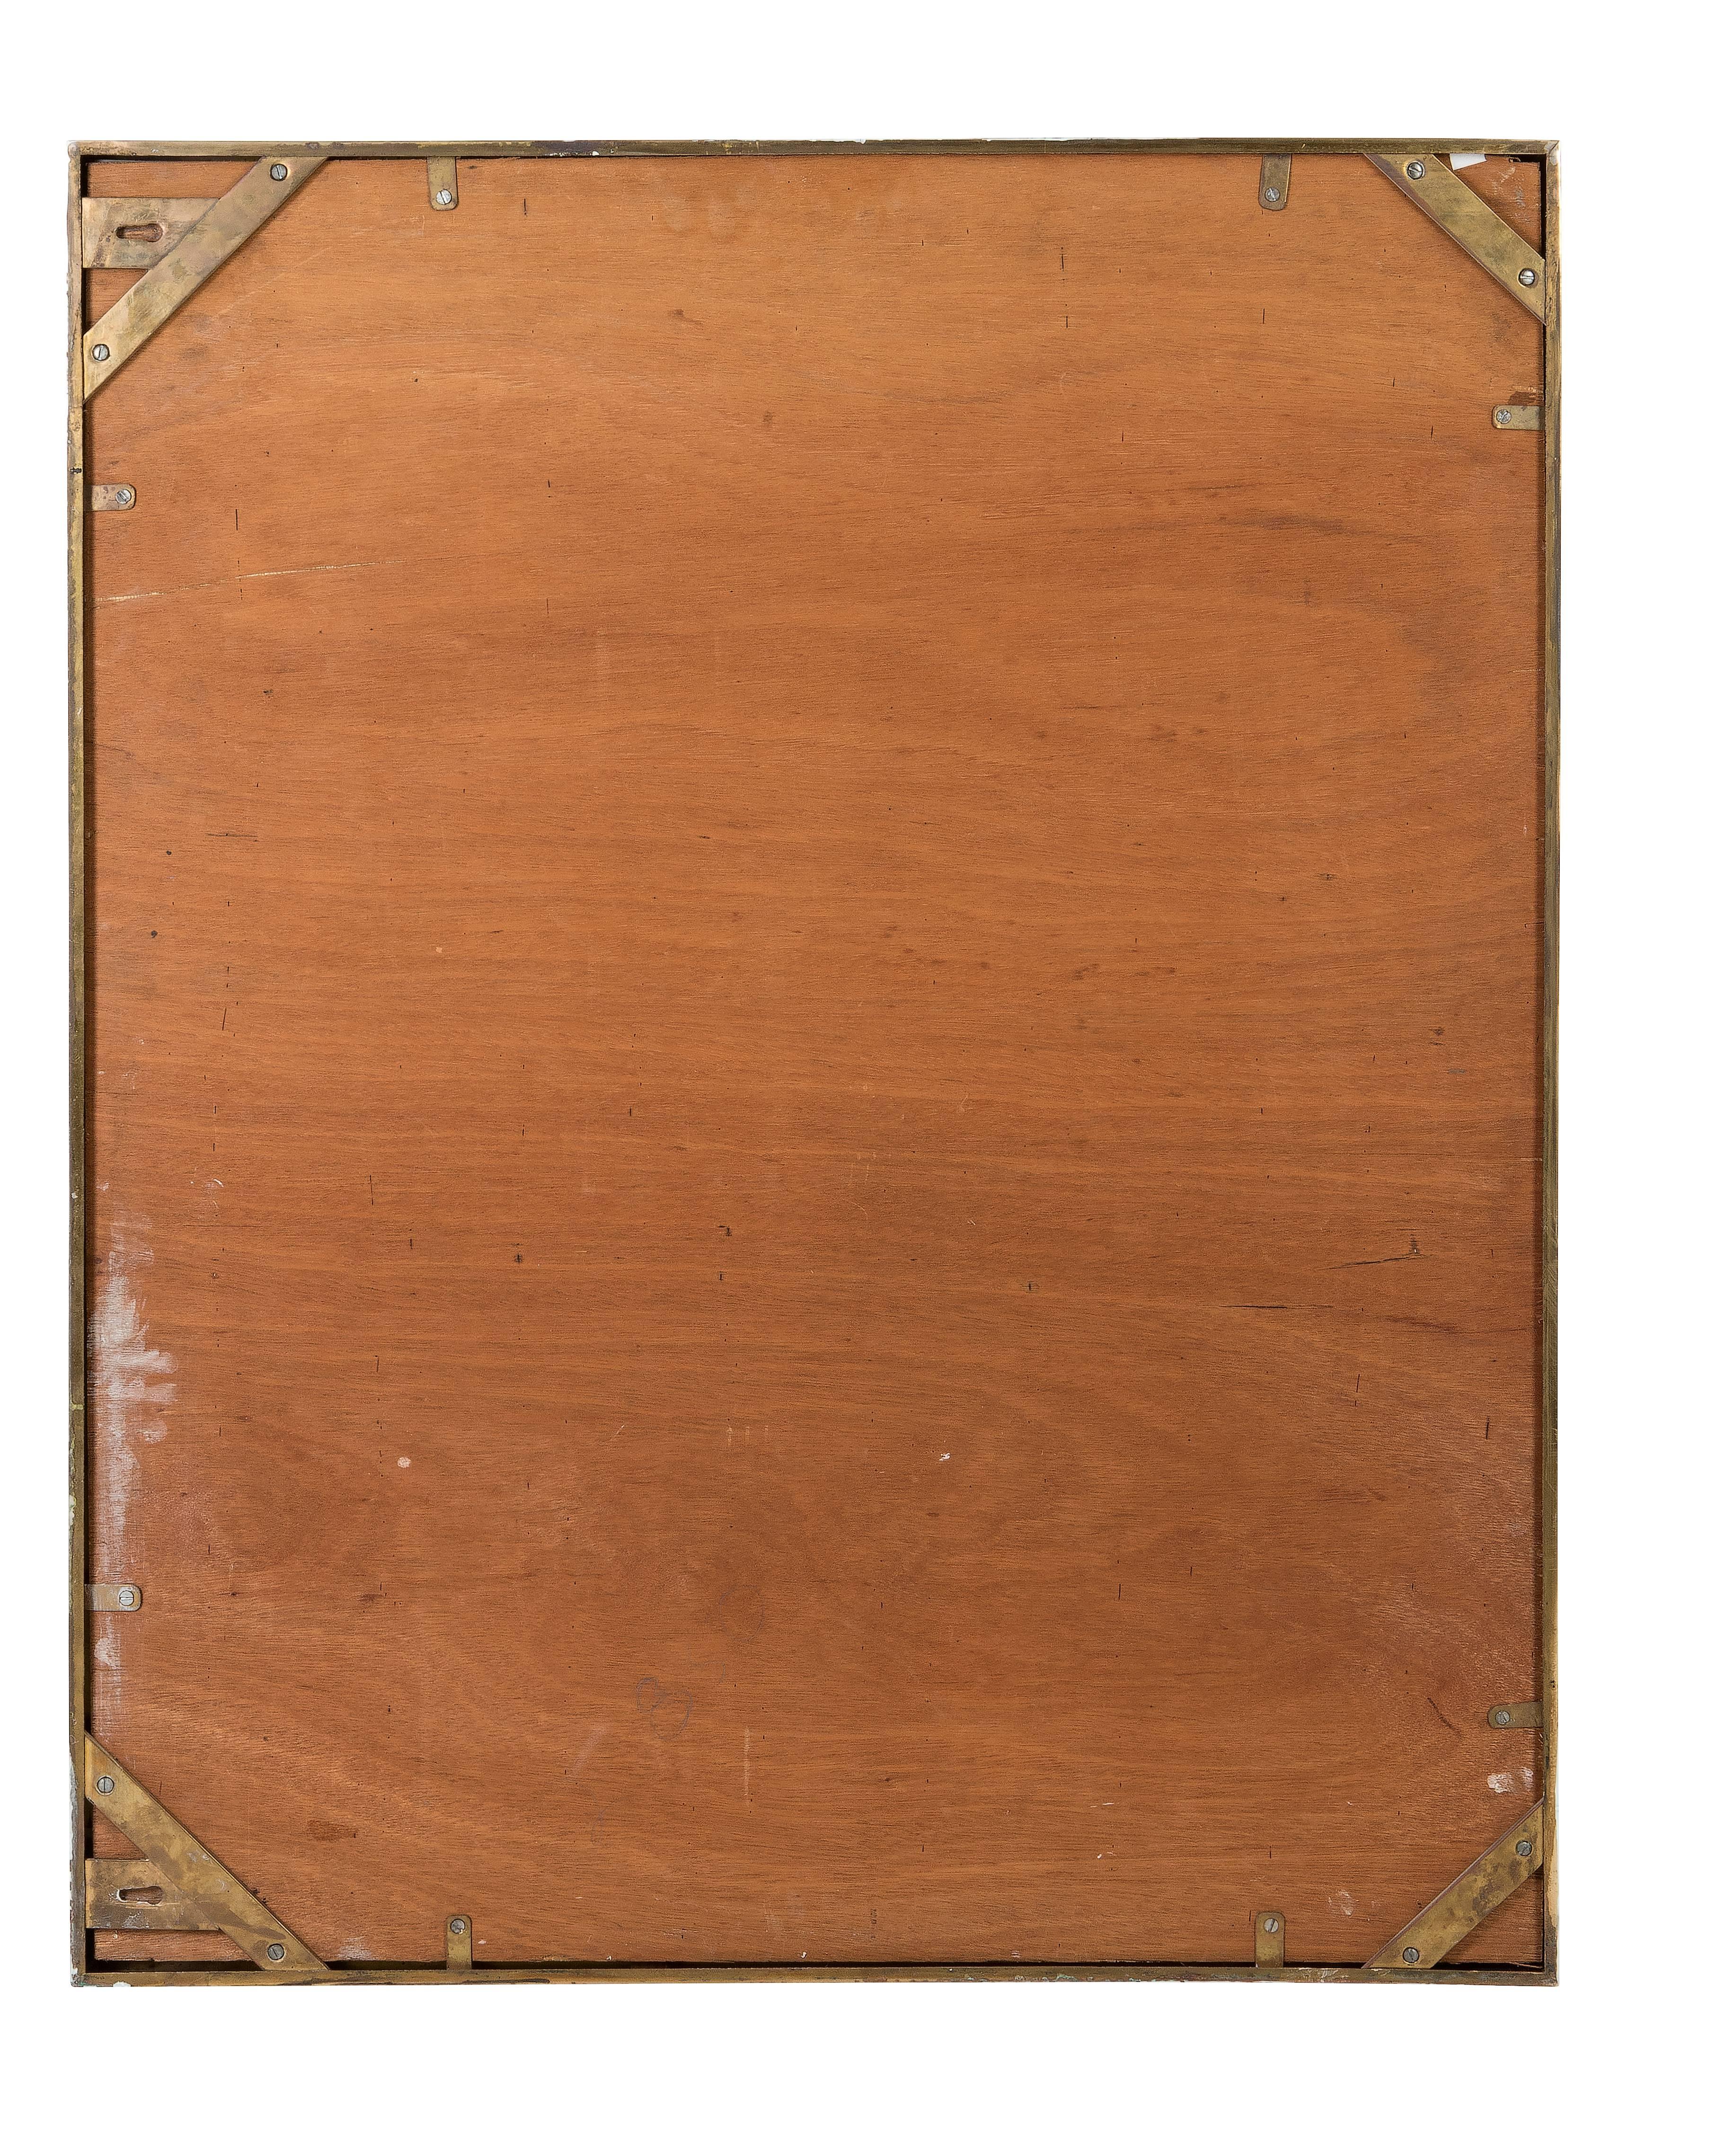 This item is from the late 20th century. The style is modern, it was sourced in Southern Africa. The frame is heavy brass with a clear mirror. Backing for the item has been customized to hang the mirror horizontally, but could be converted to hang